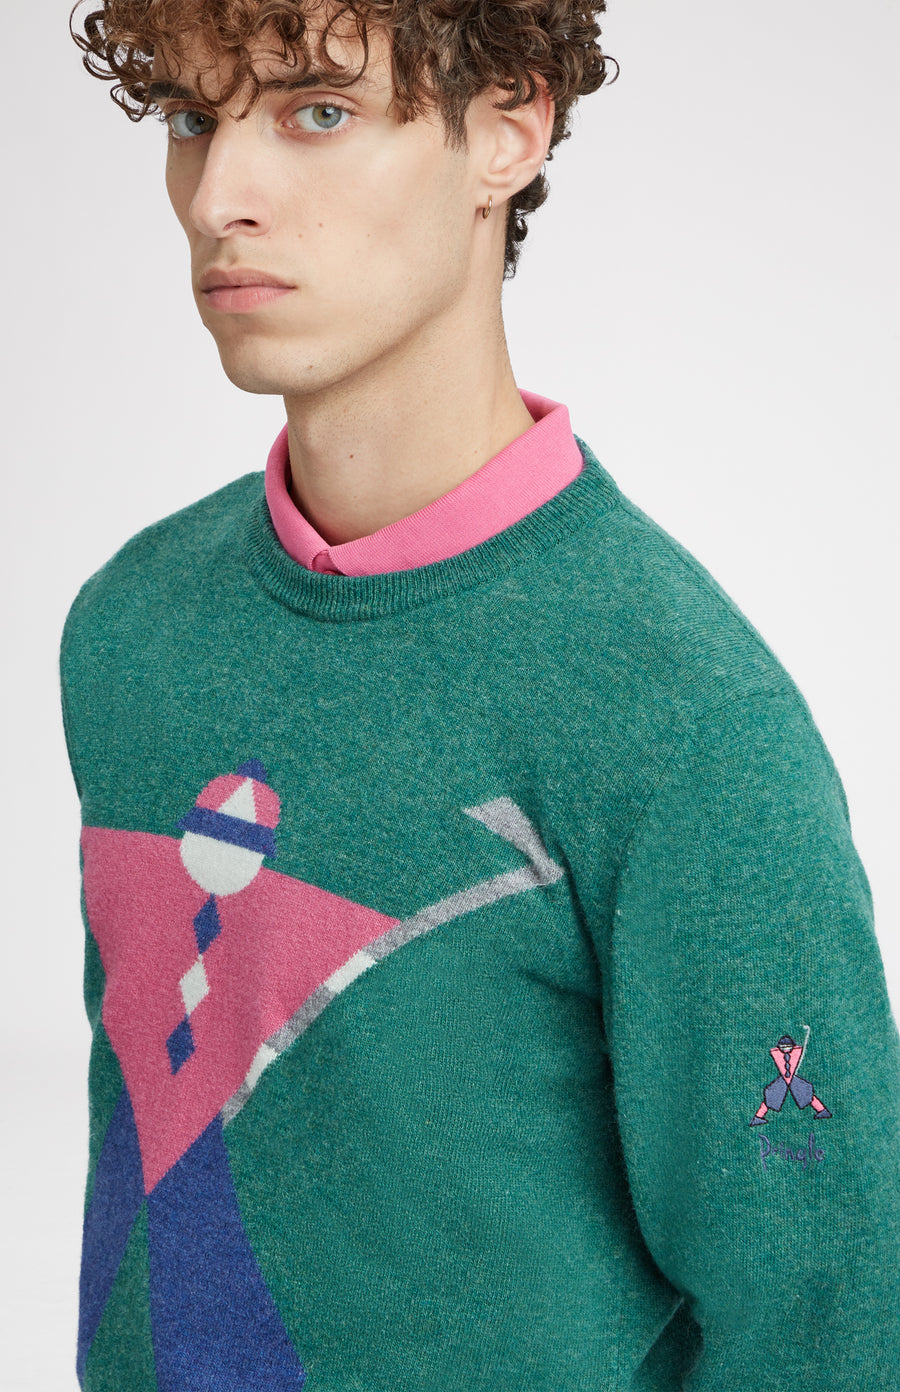 Round Neck Geometric George Golf Jumper in Teal embroidery detail - Pringle of Scotland